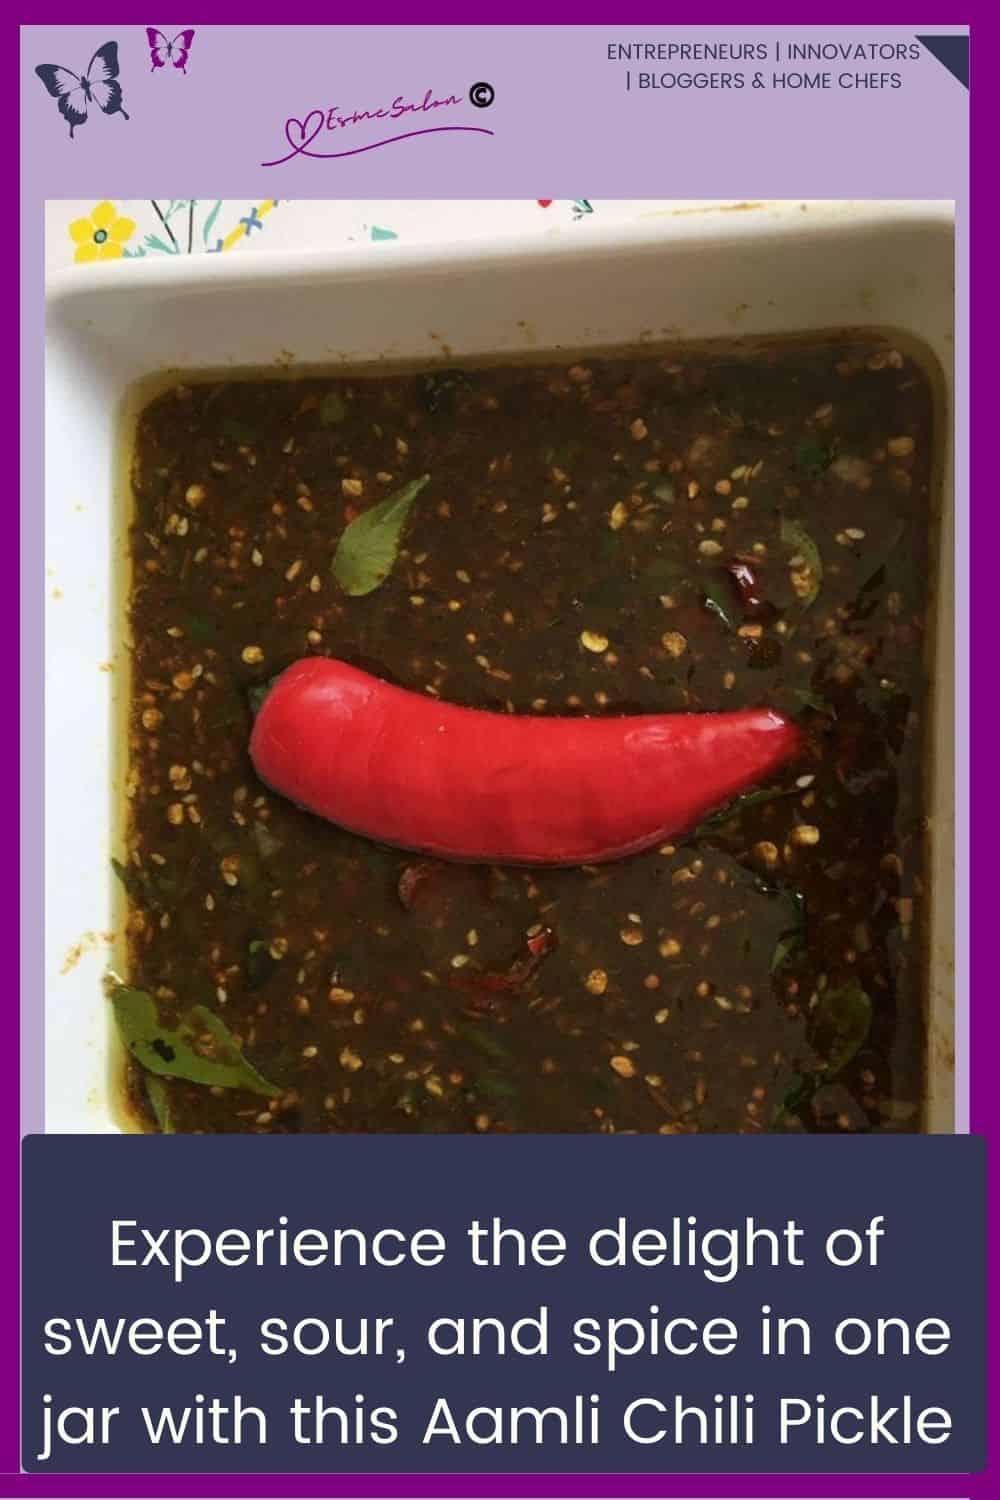 an image of a square white dish filled with Sweet And Sour Ground Aamli Chili Pickle (Tamarind) and a red chili as decoration